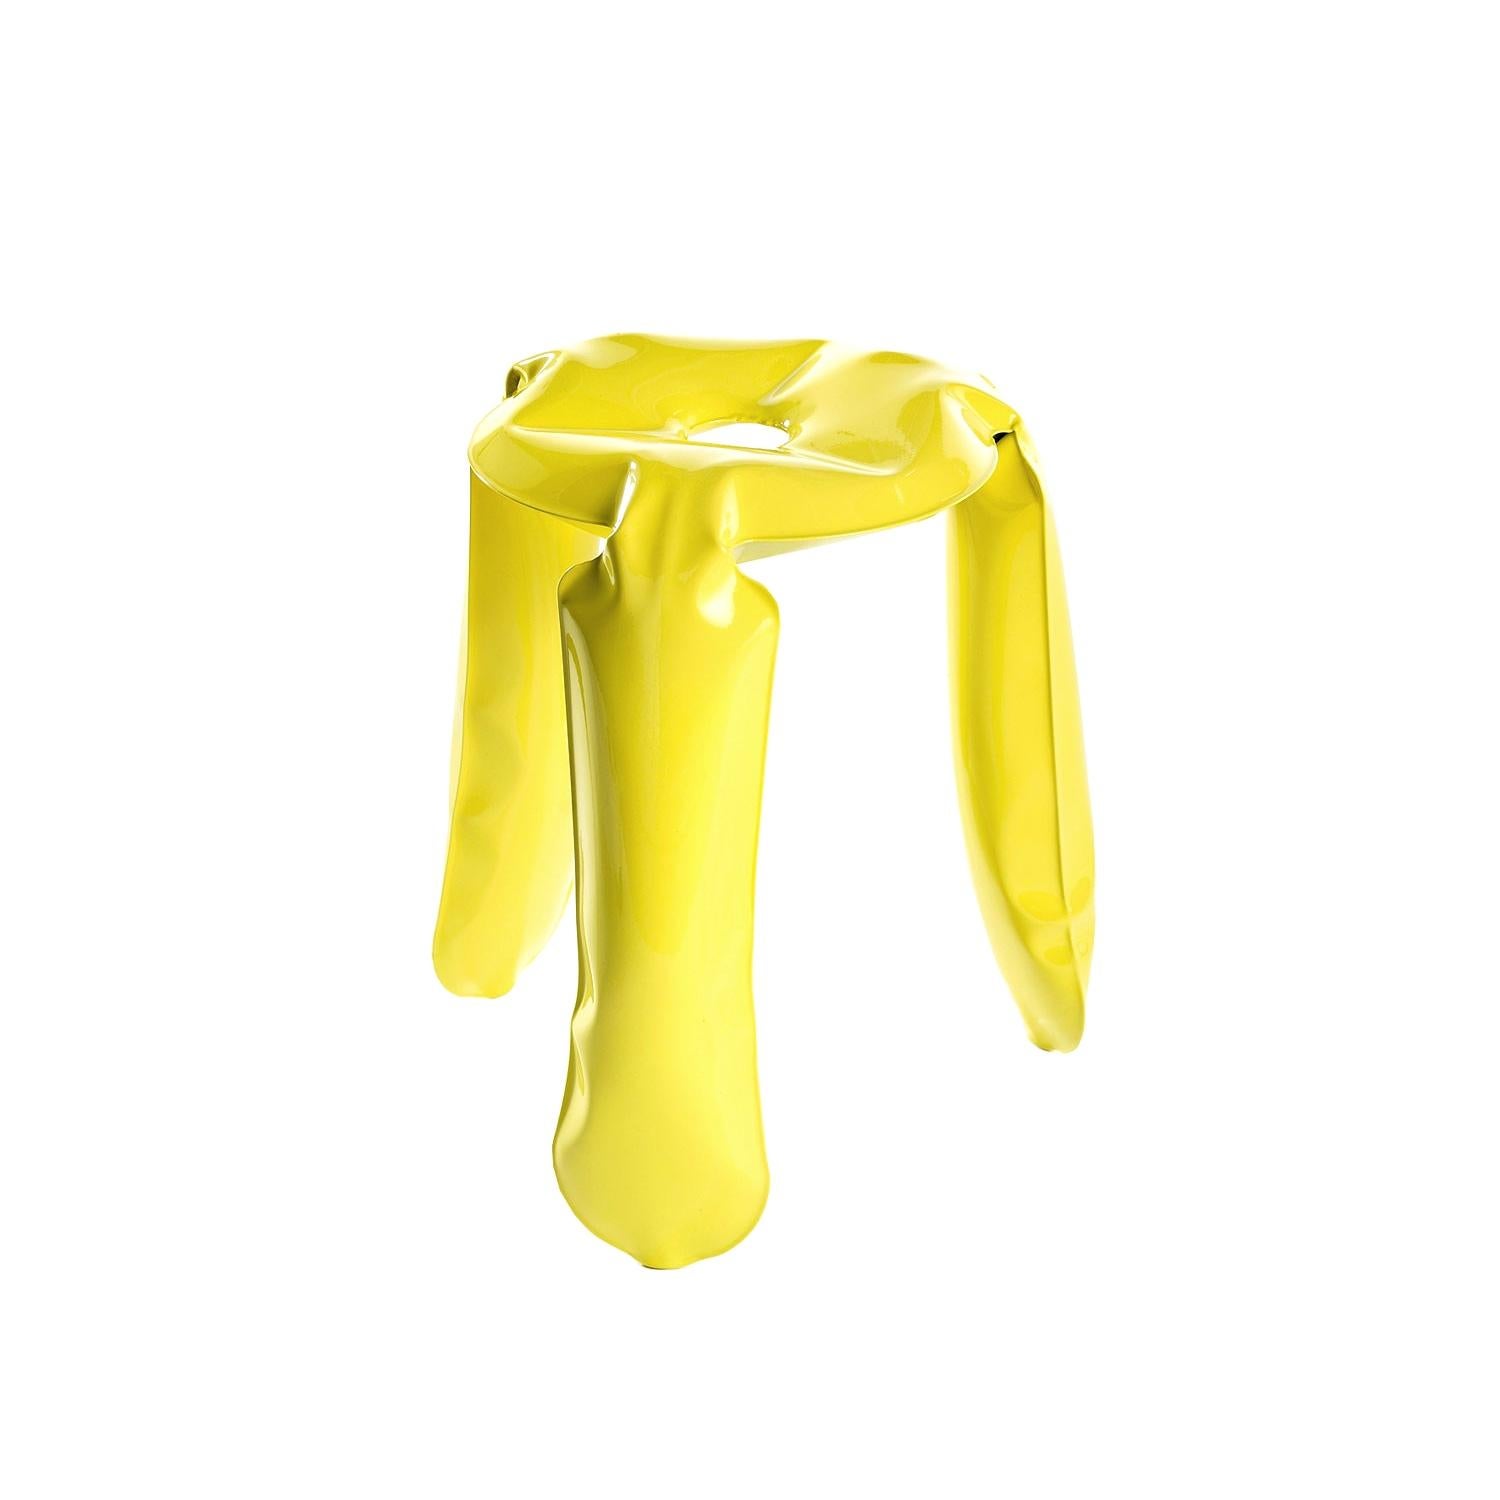 Polish In Stock in Los Angeles, Limited Edition Stool in Glossy Yellow Finish